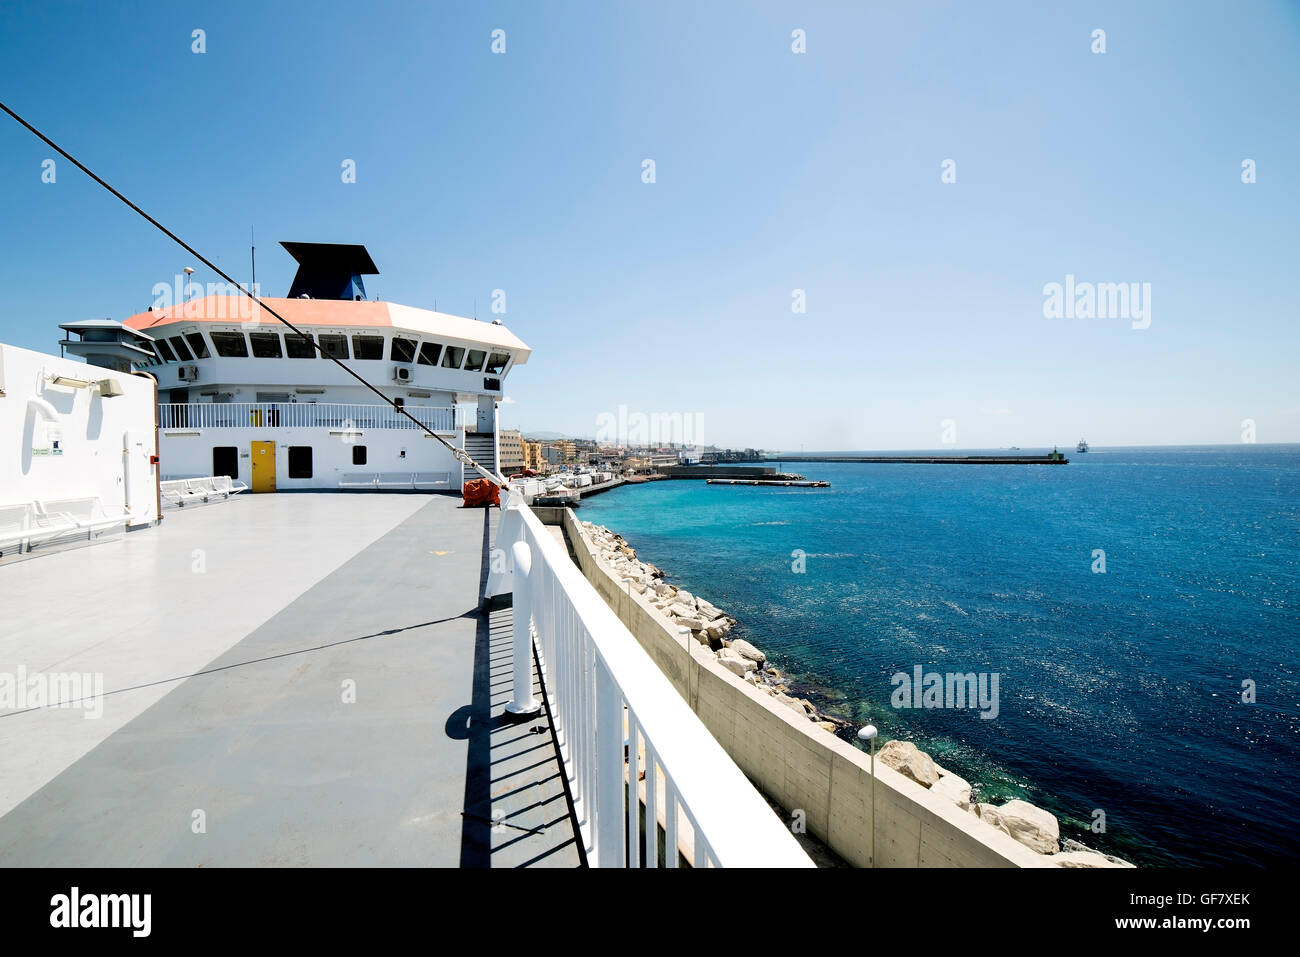 the deck of a ferry connecting Sicily and Calabria, in the port of San Giovanni Stock Photo